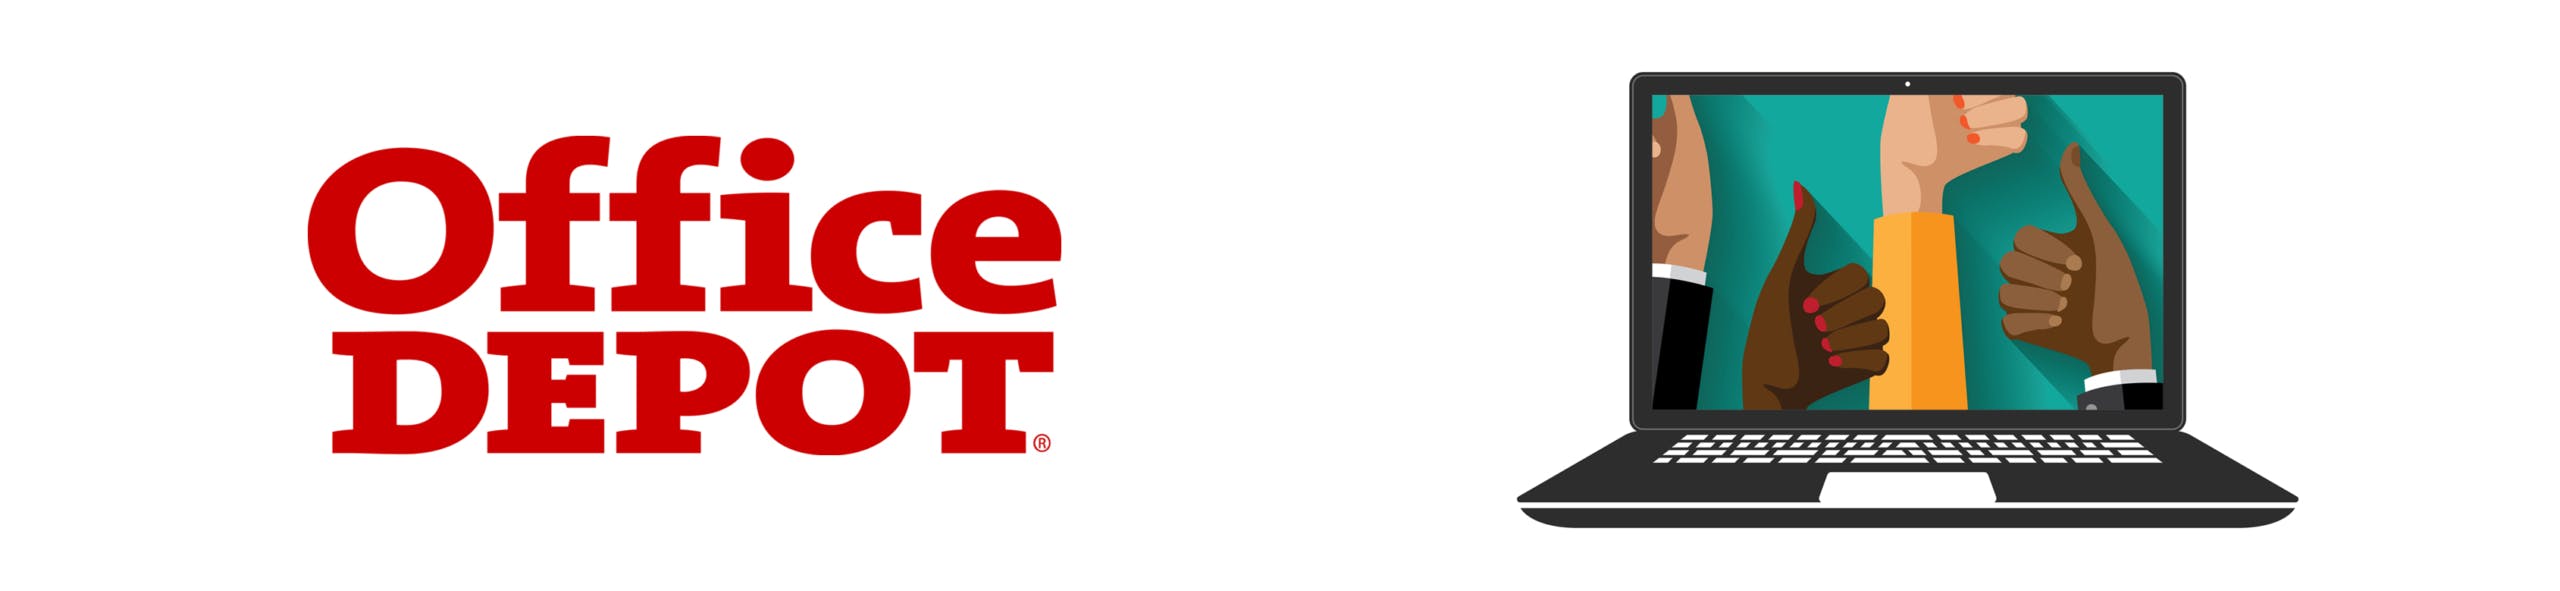 Office Depot logo next to a laptop with thumbs pointing up